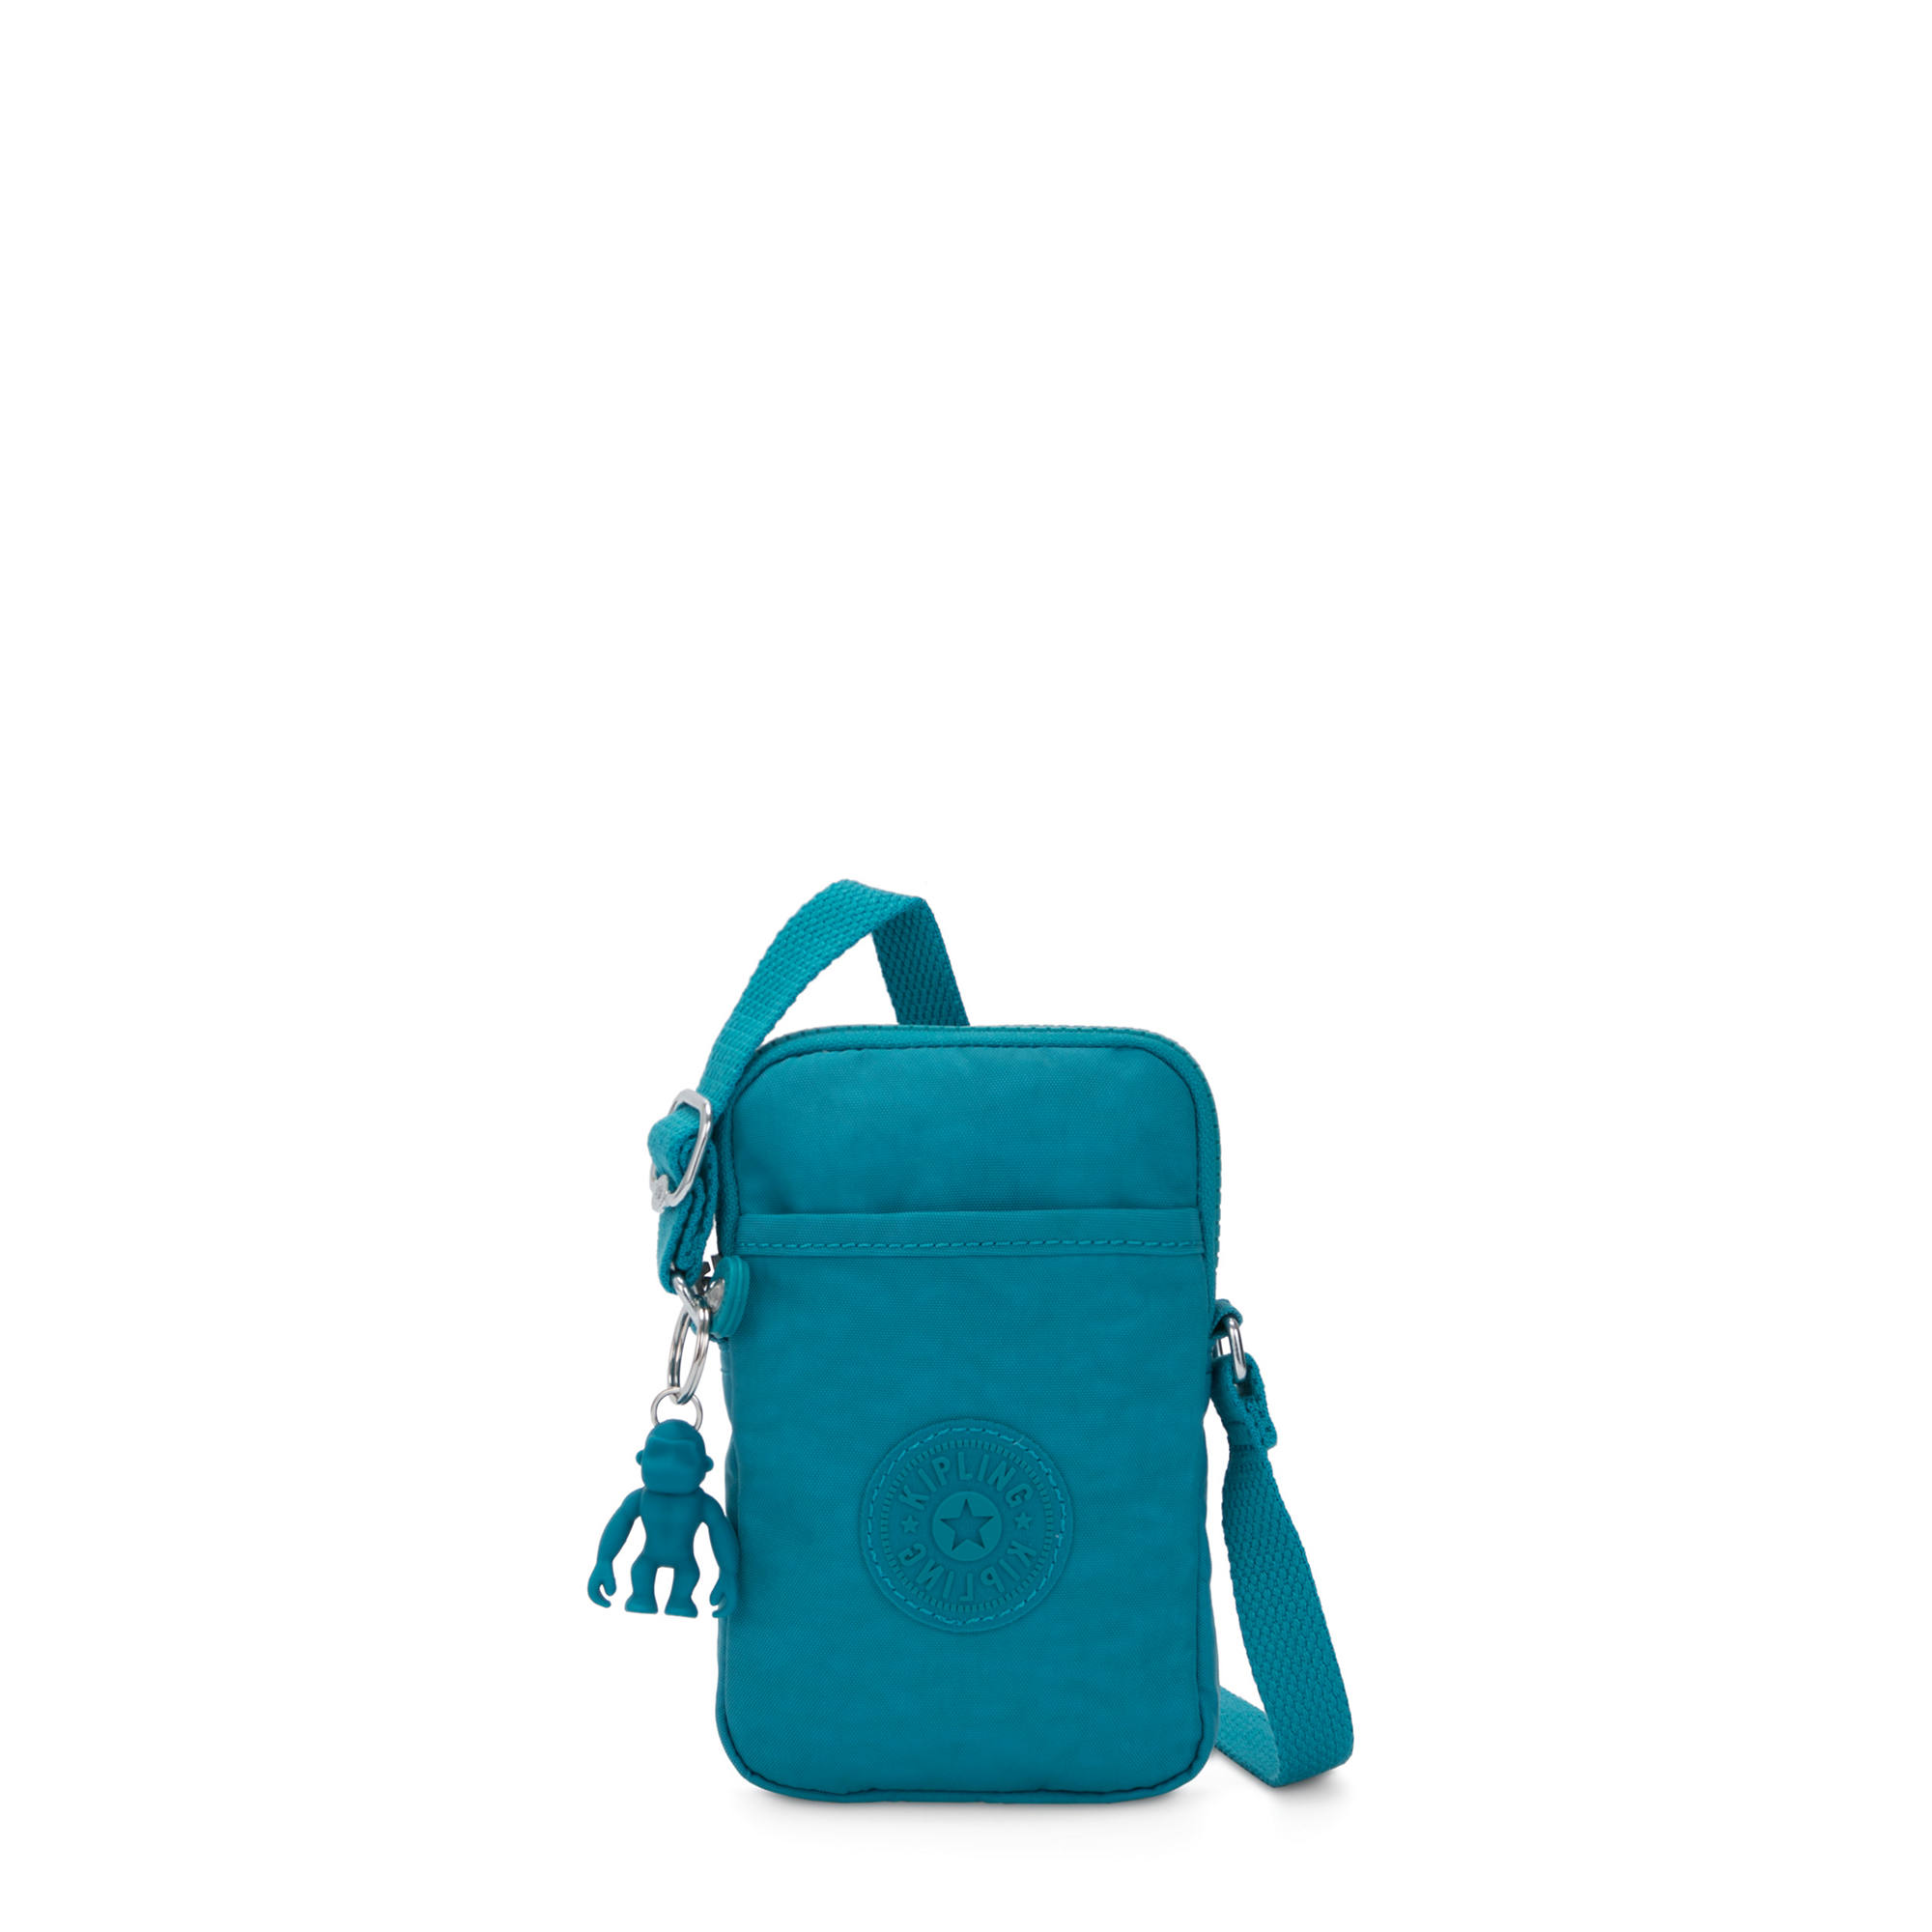 Tally Crossbody Phone Bag,Turquoise Sea,large-zoomed